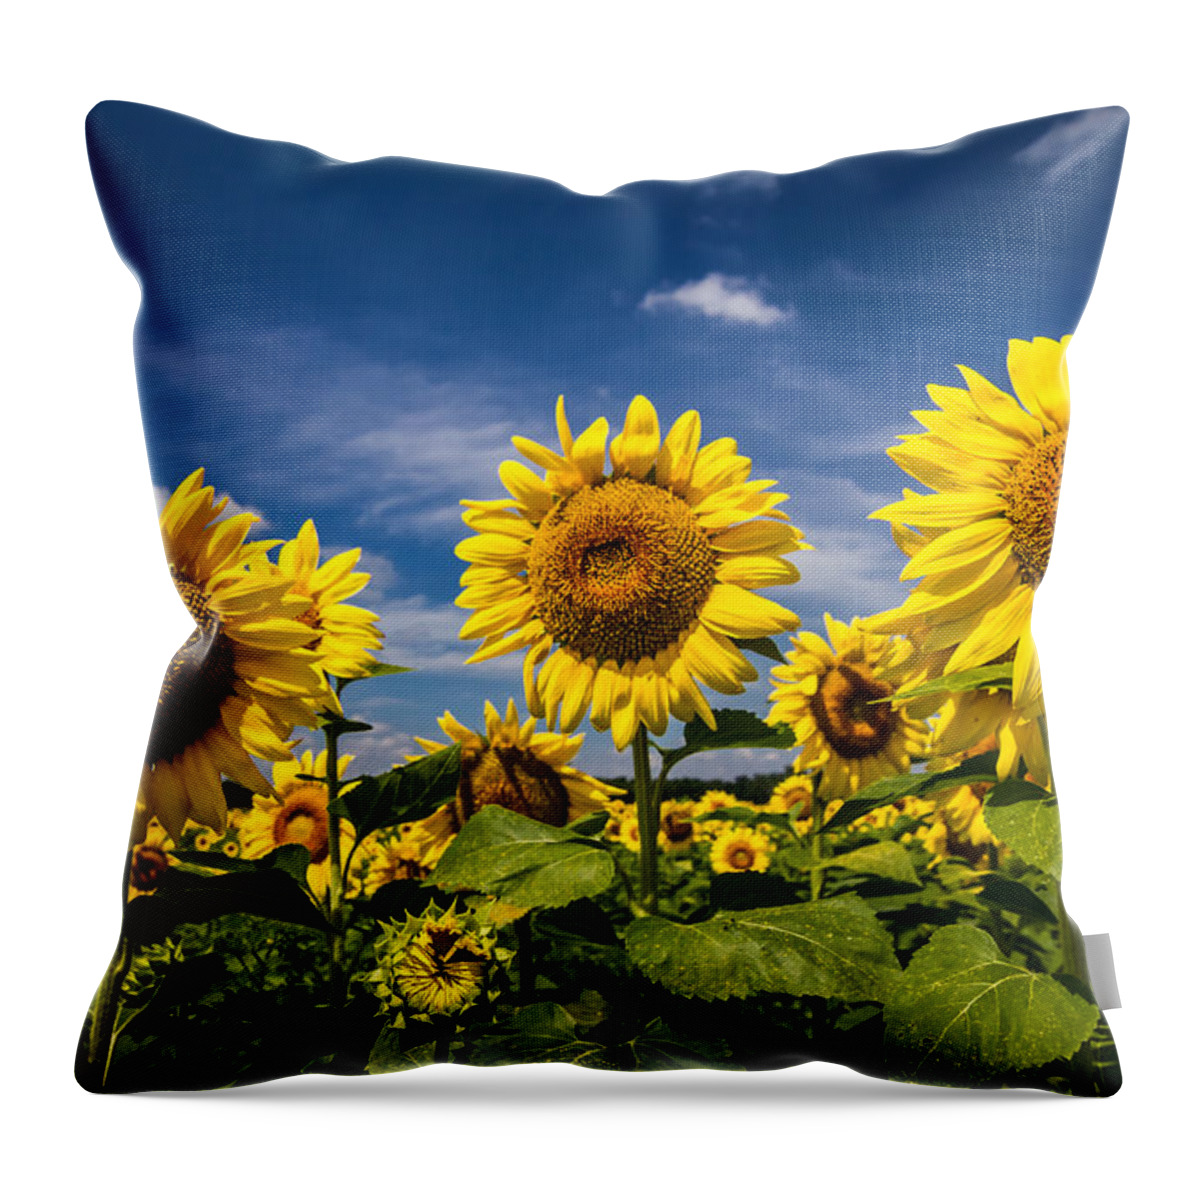 Blue Sky Throw Pillow featuring the photograph Three Suns by Ron Pate